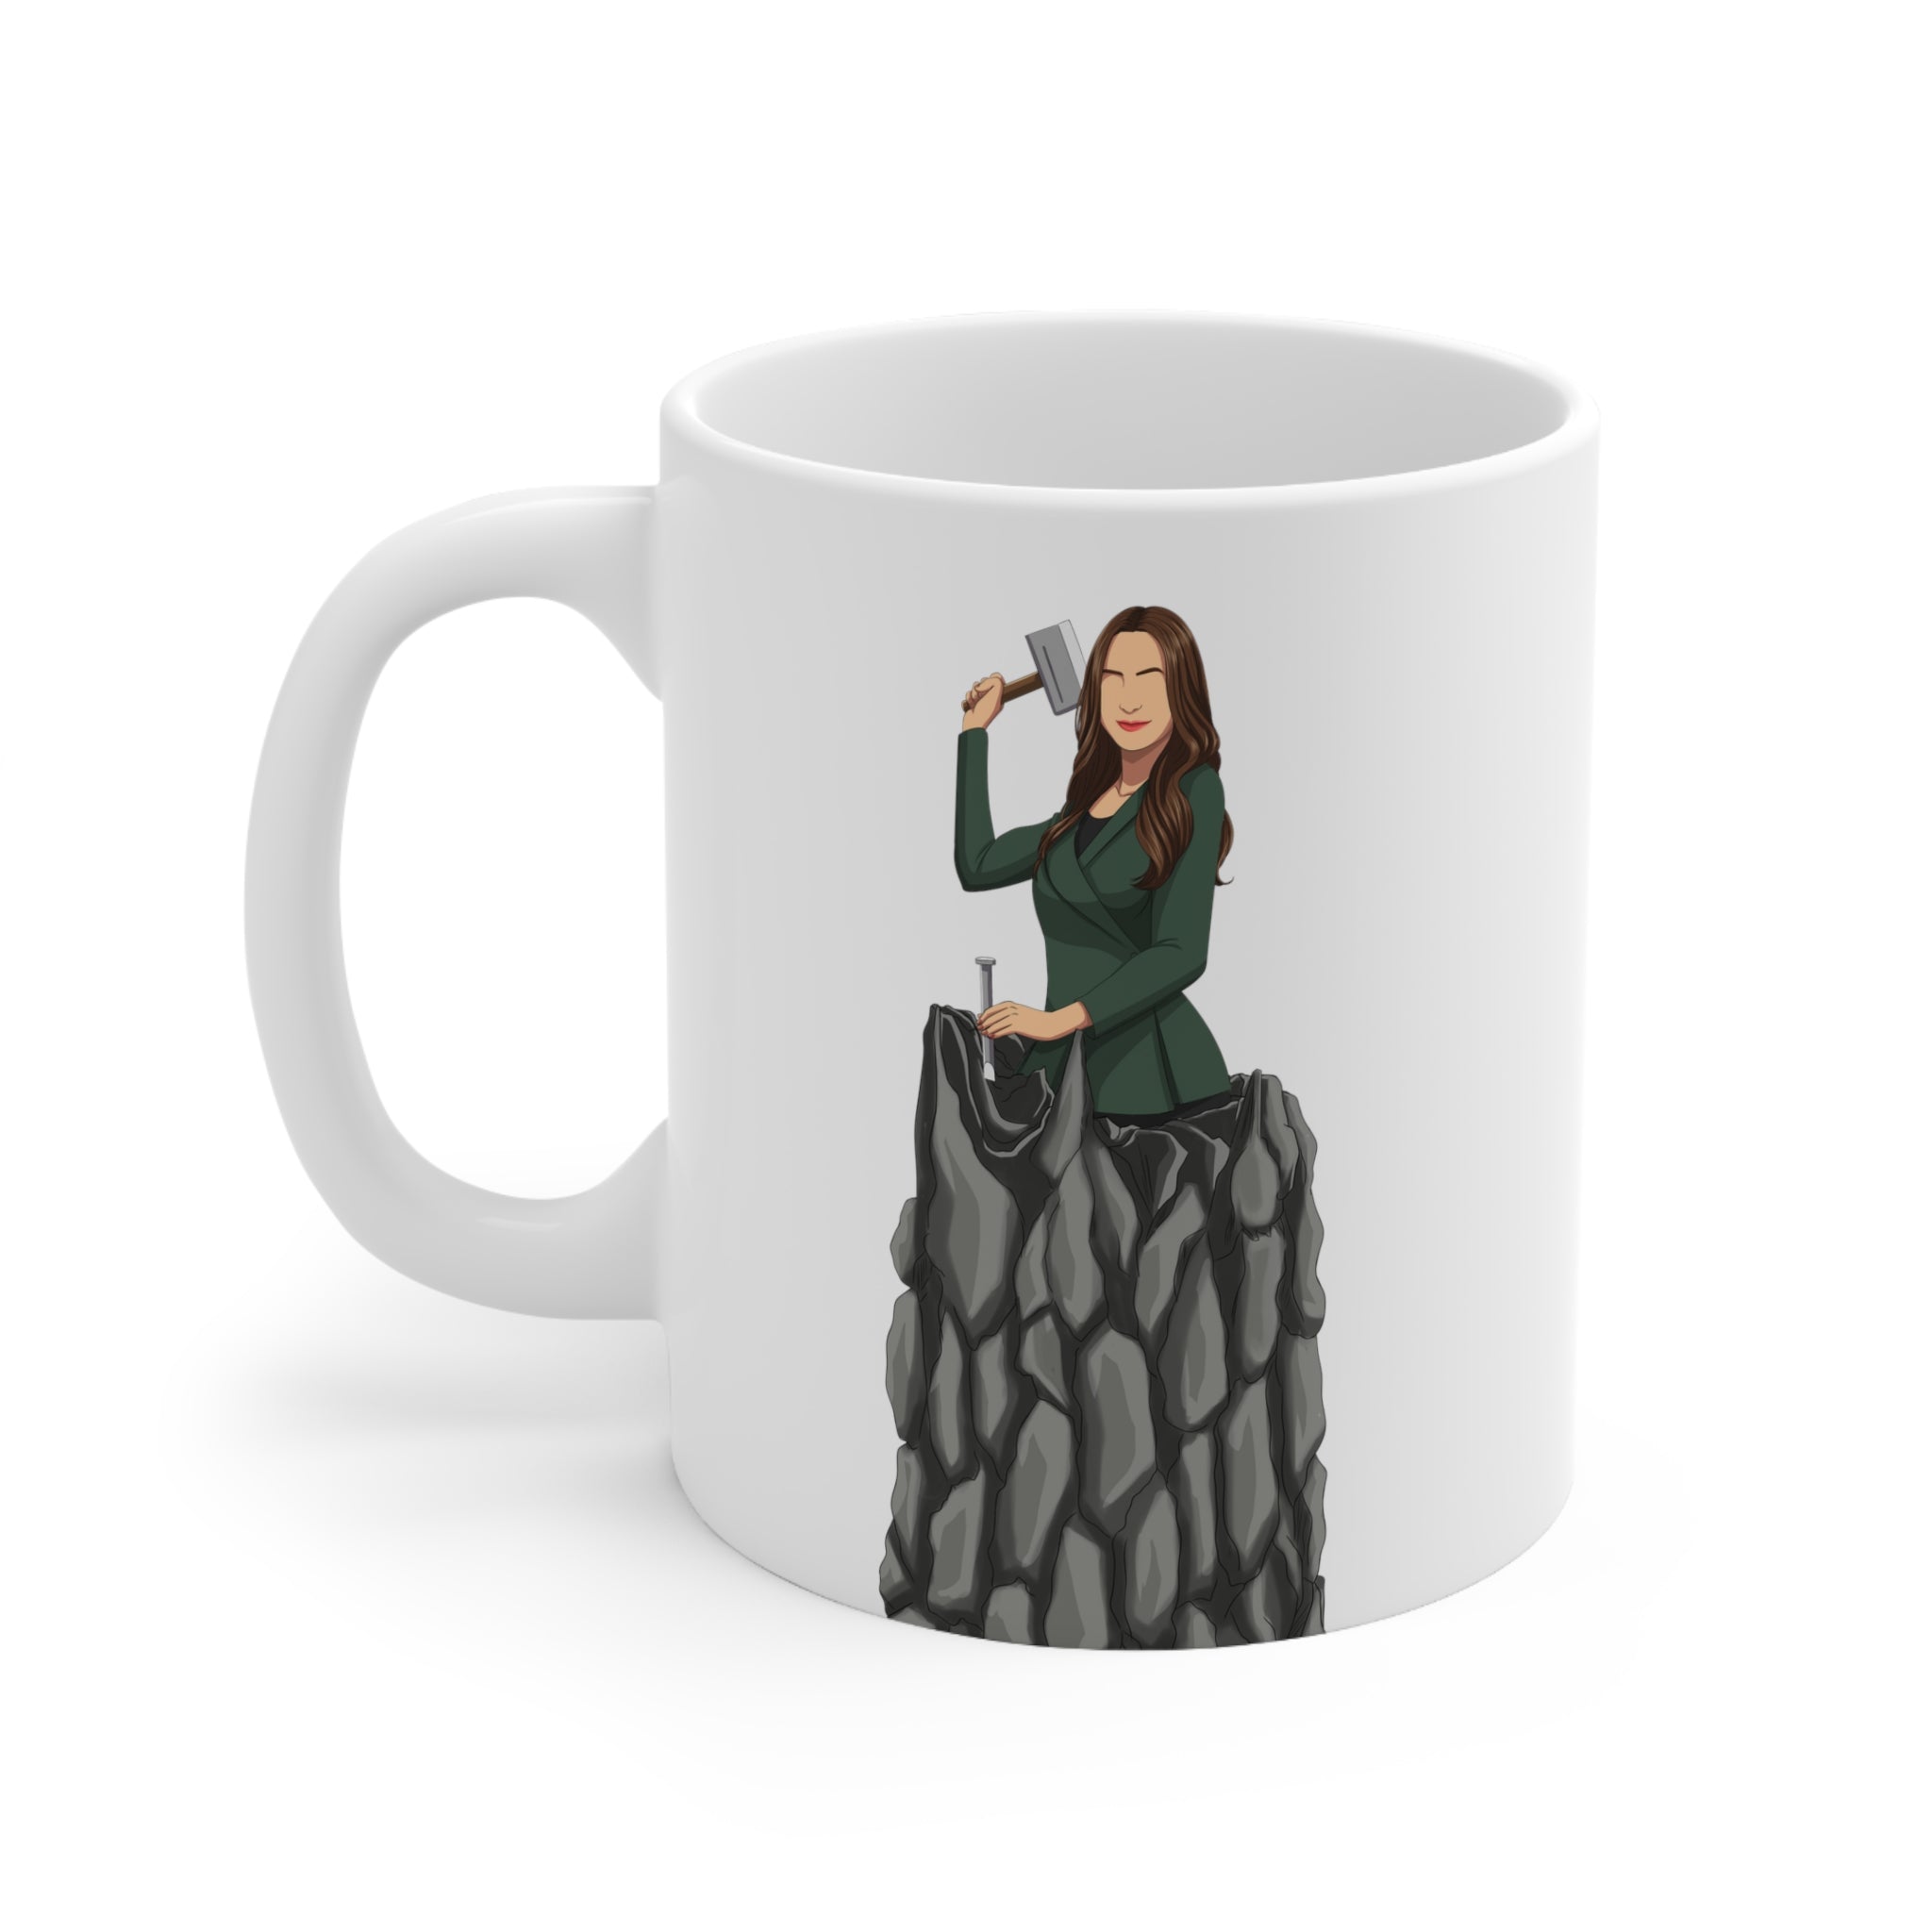 A person working hard to better his/herself - Ceramic Mug 11oz - Self-Made Woman #5 - Breakthrough Collection